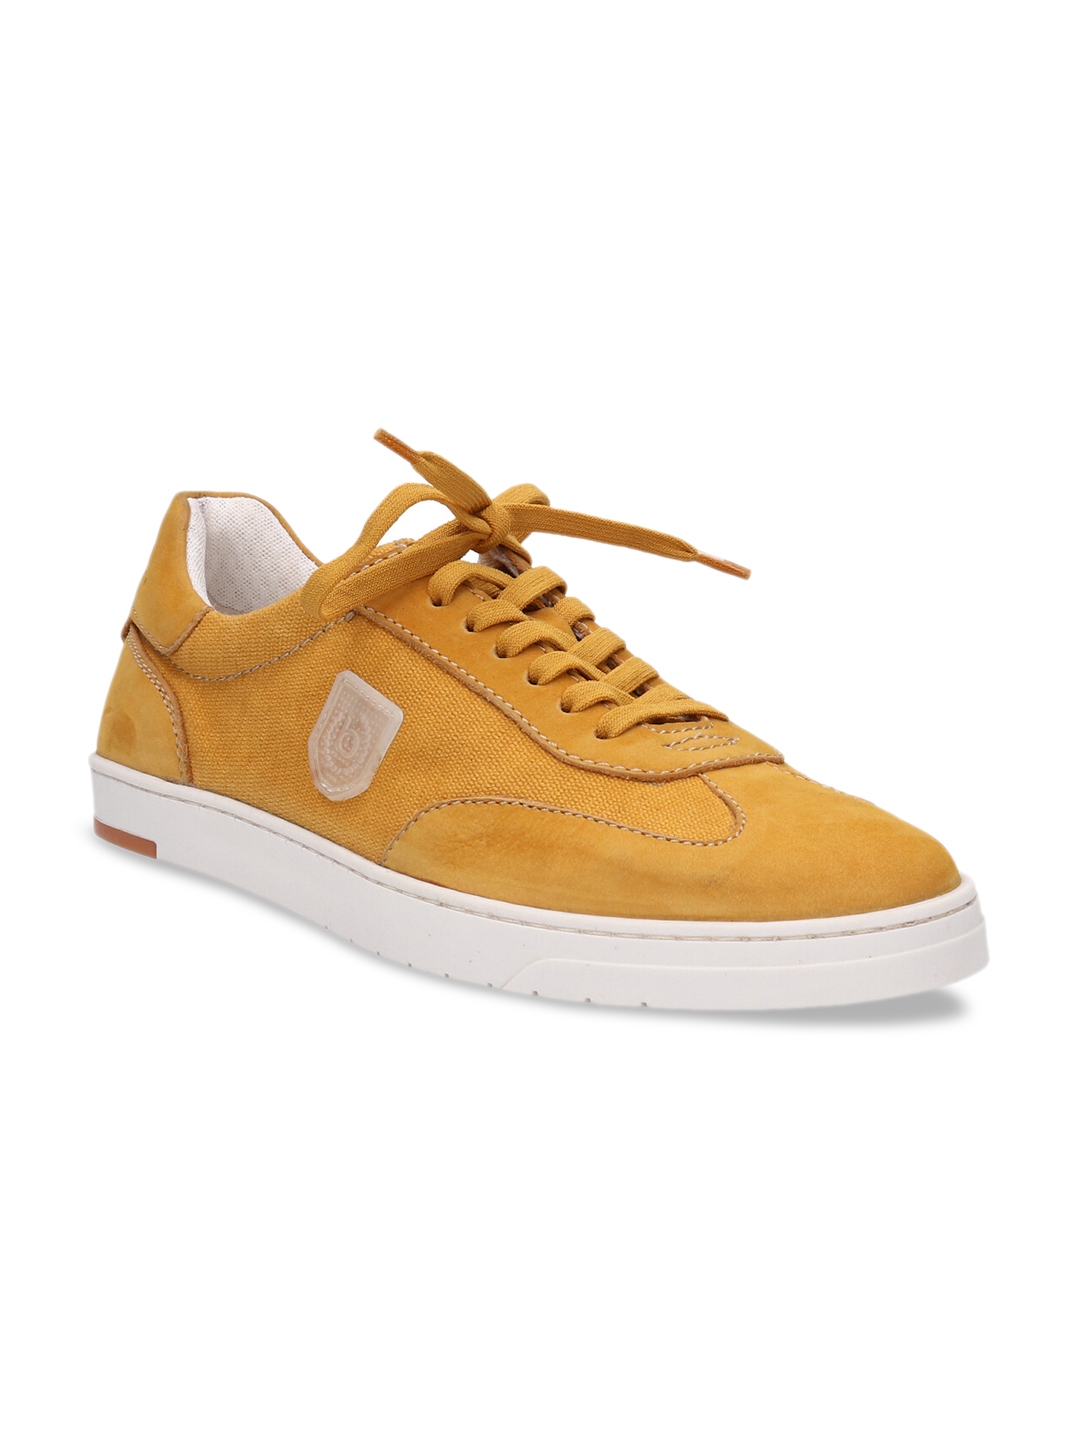 Buy Bugatti Men Yellow Solid Sneakers Casual Shoes For Men 11623120 Myntra 0942